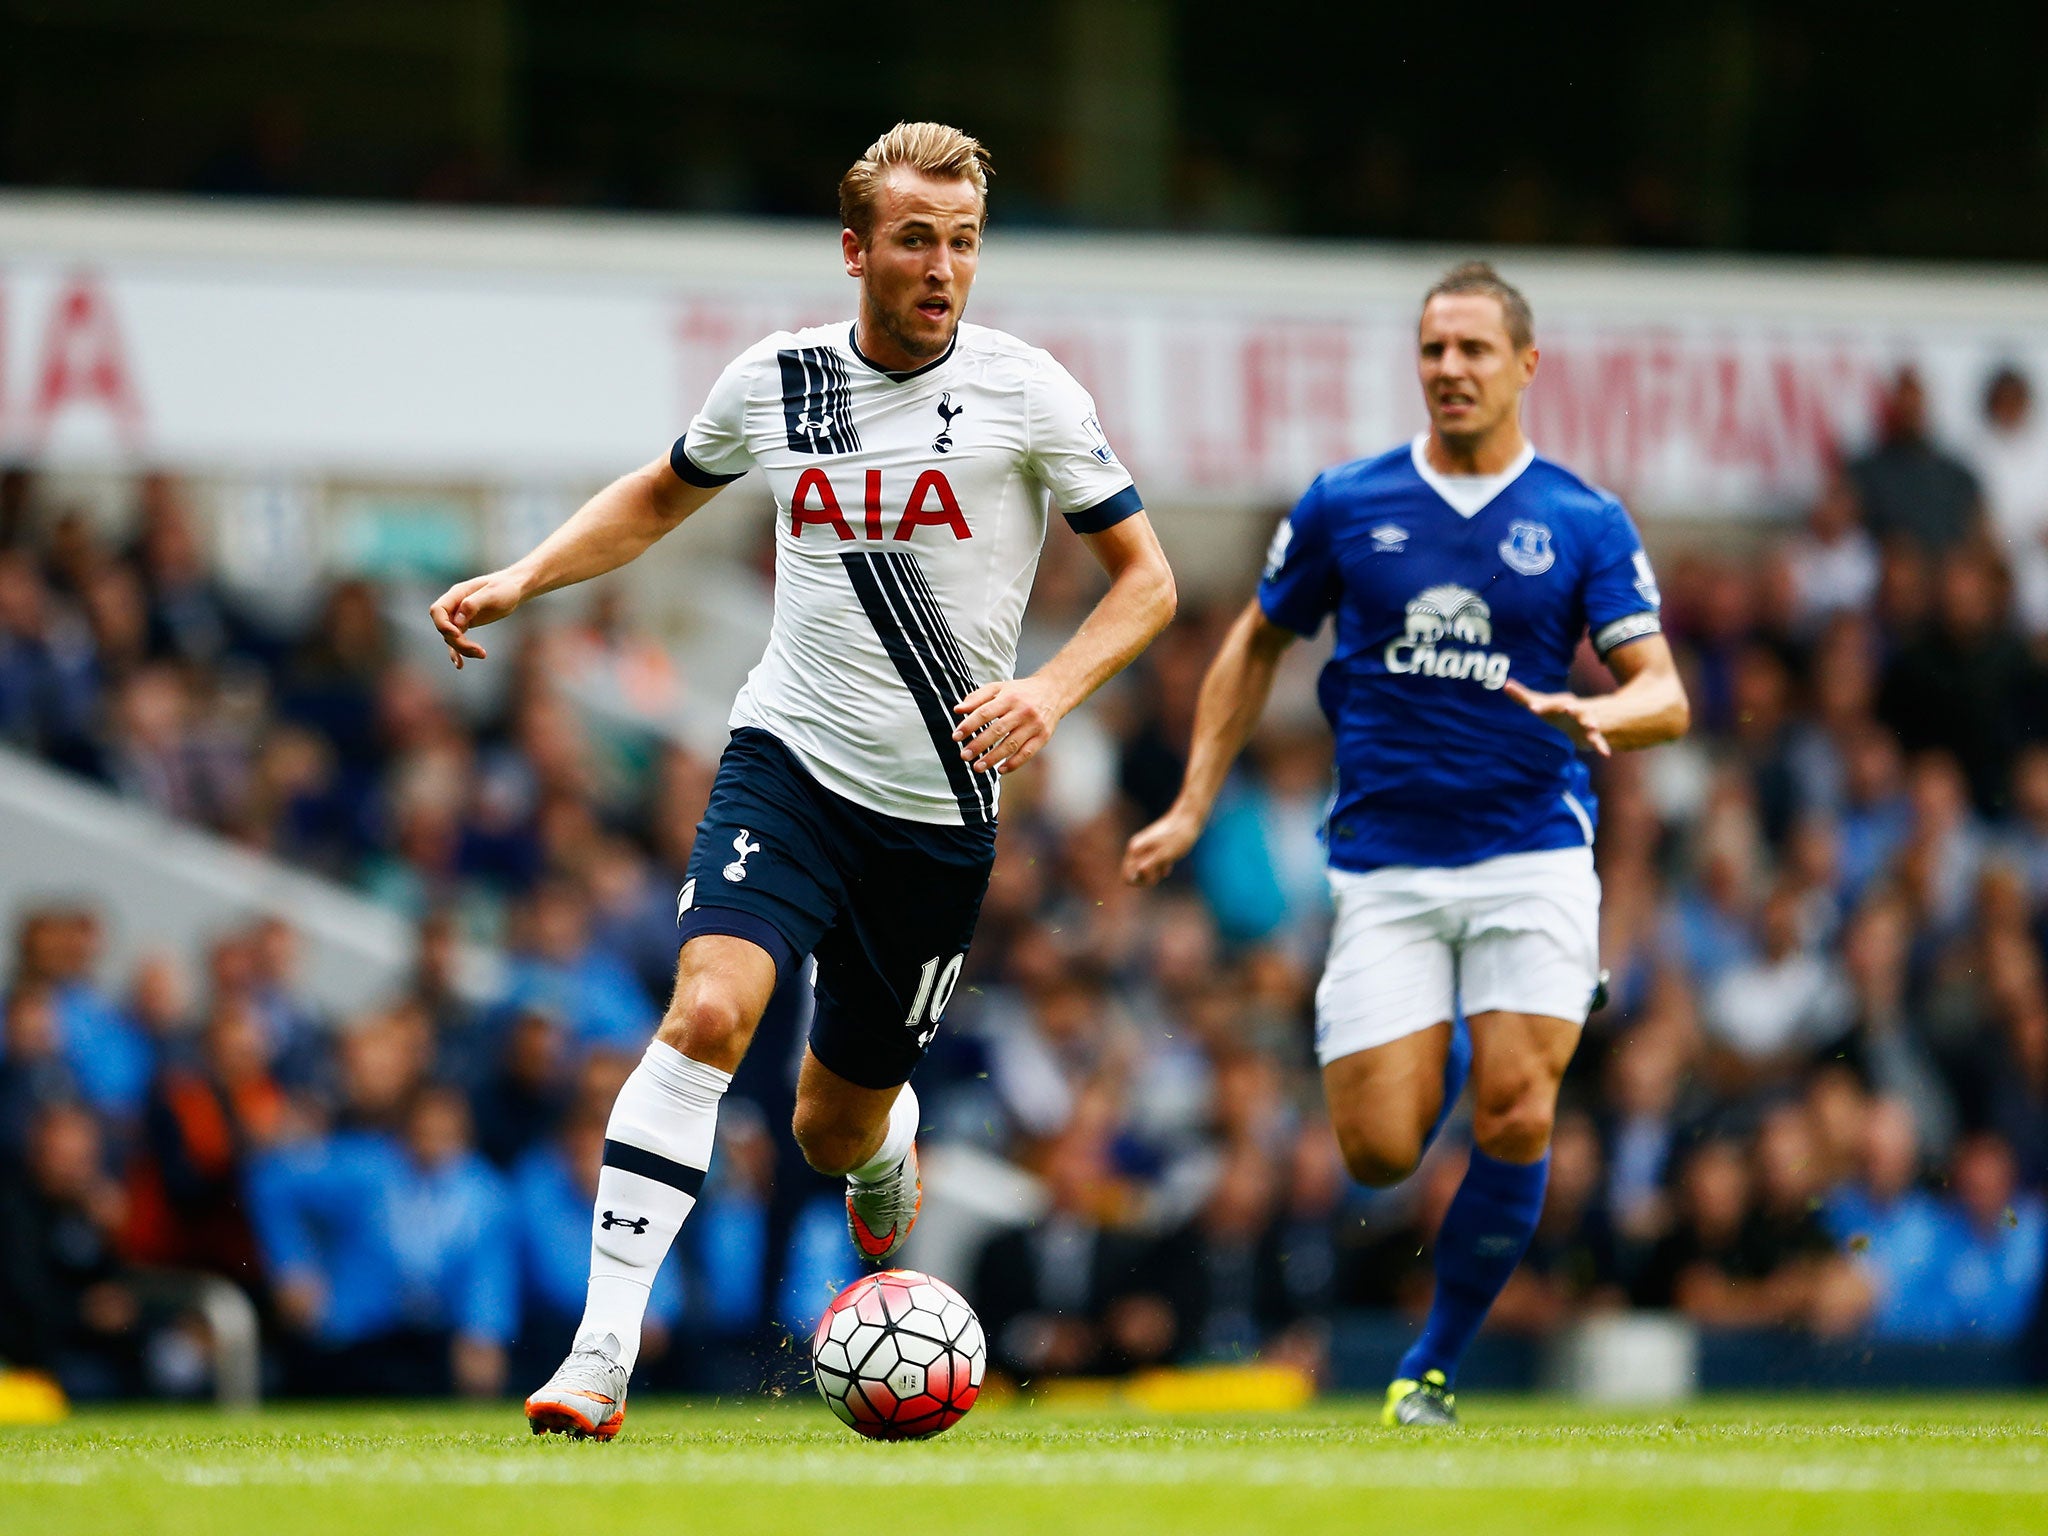 Harry Kane missed a golden chance to score against Everton